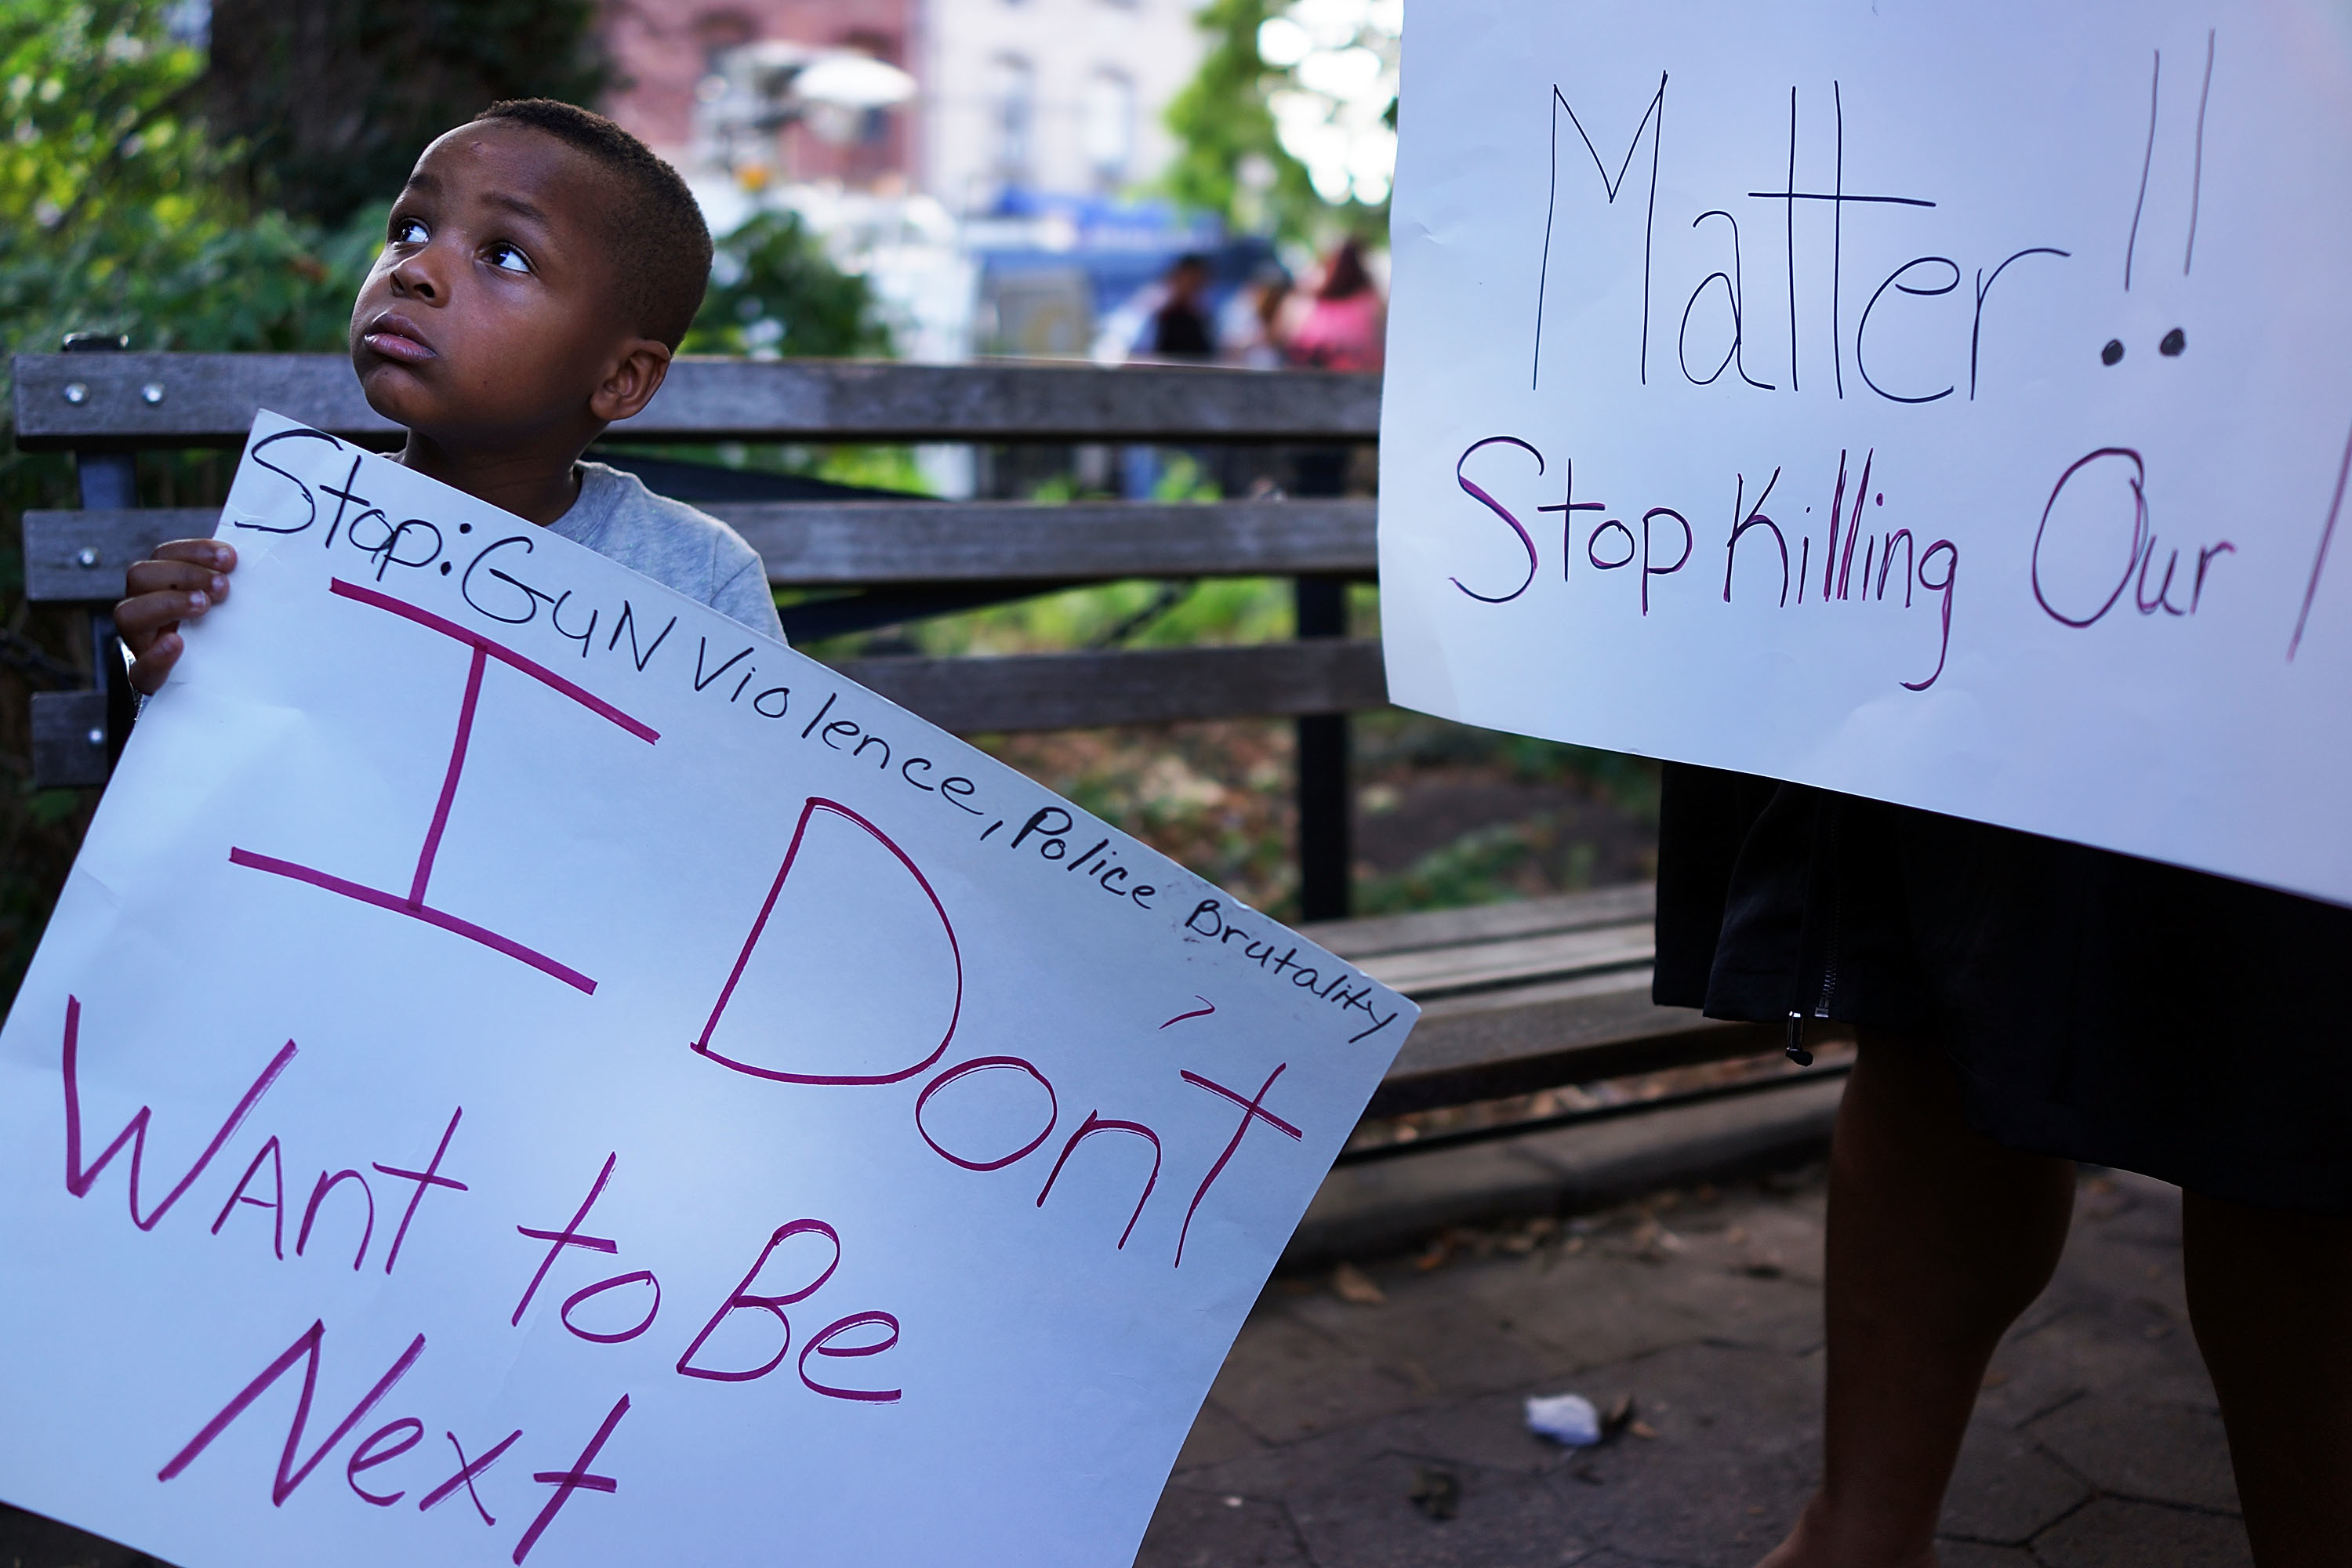 Richard Watkins (5) attends a vigil for Eric Garner near where he died after he was taken into police custody in Staten Island last Thursday on July 22, 2014 in New York City. (Spencer Platt—Getty Images)